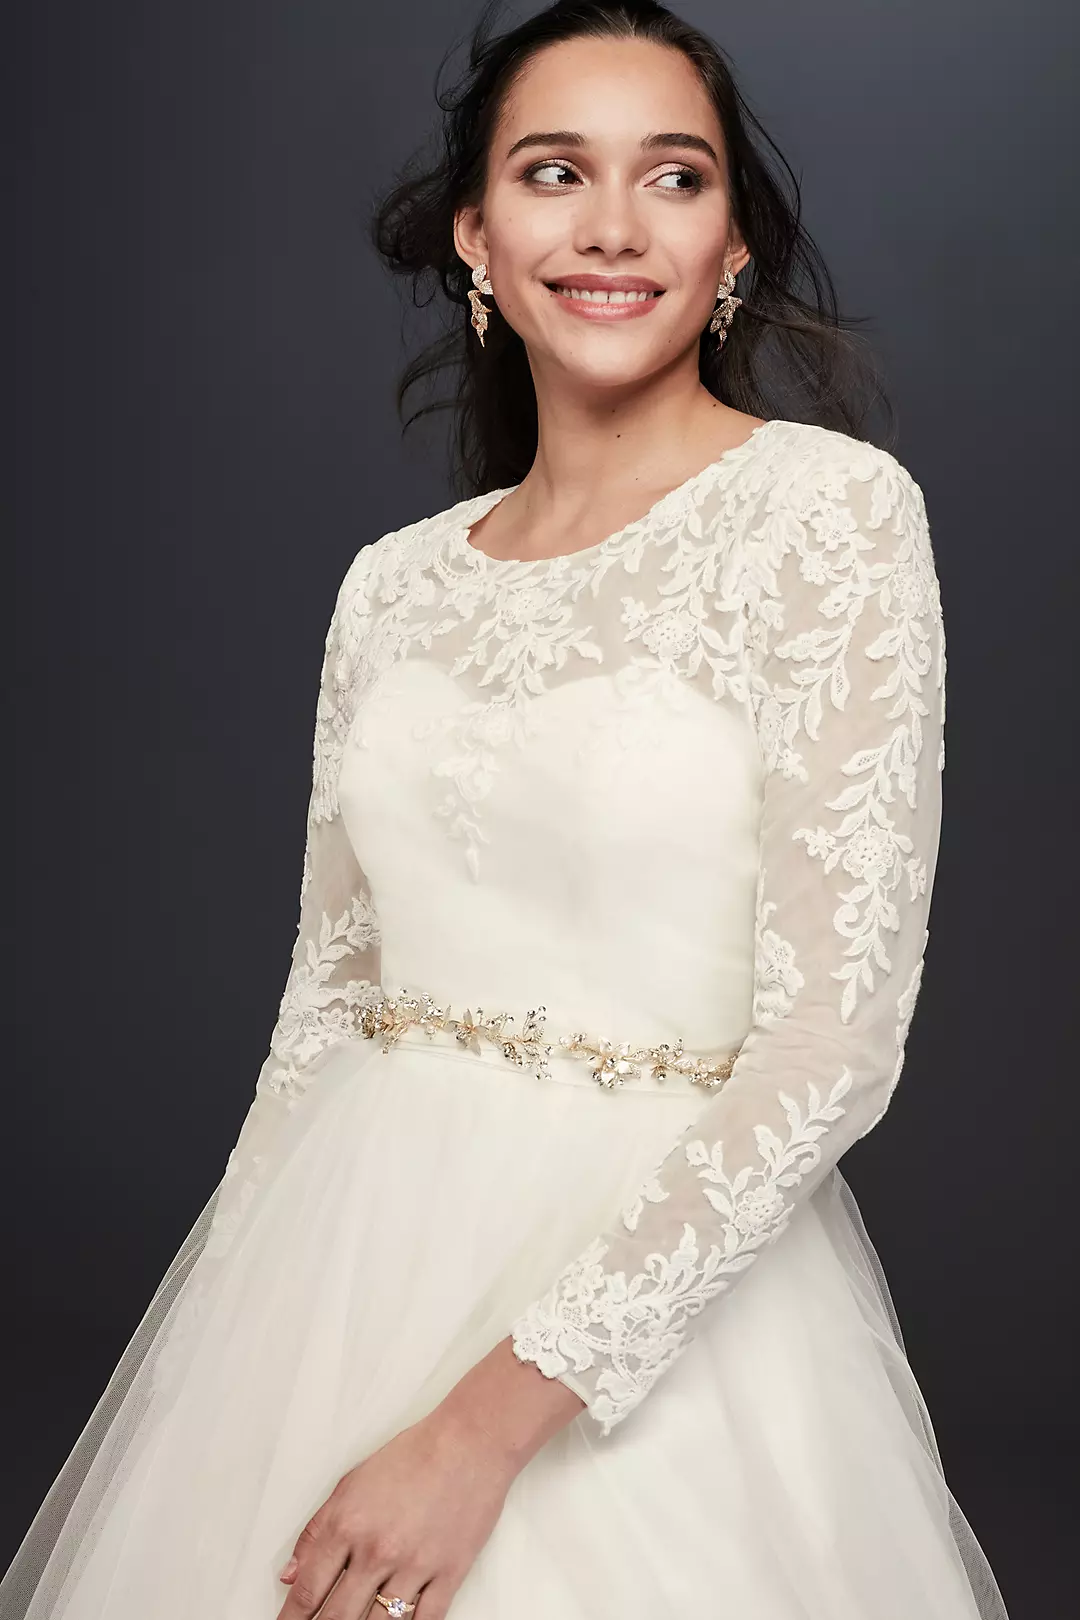 Embroidered Lace Long-Sleeve Dress Topper | David's Bridal